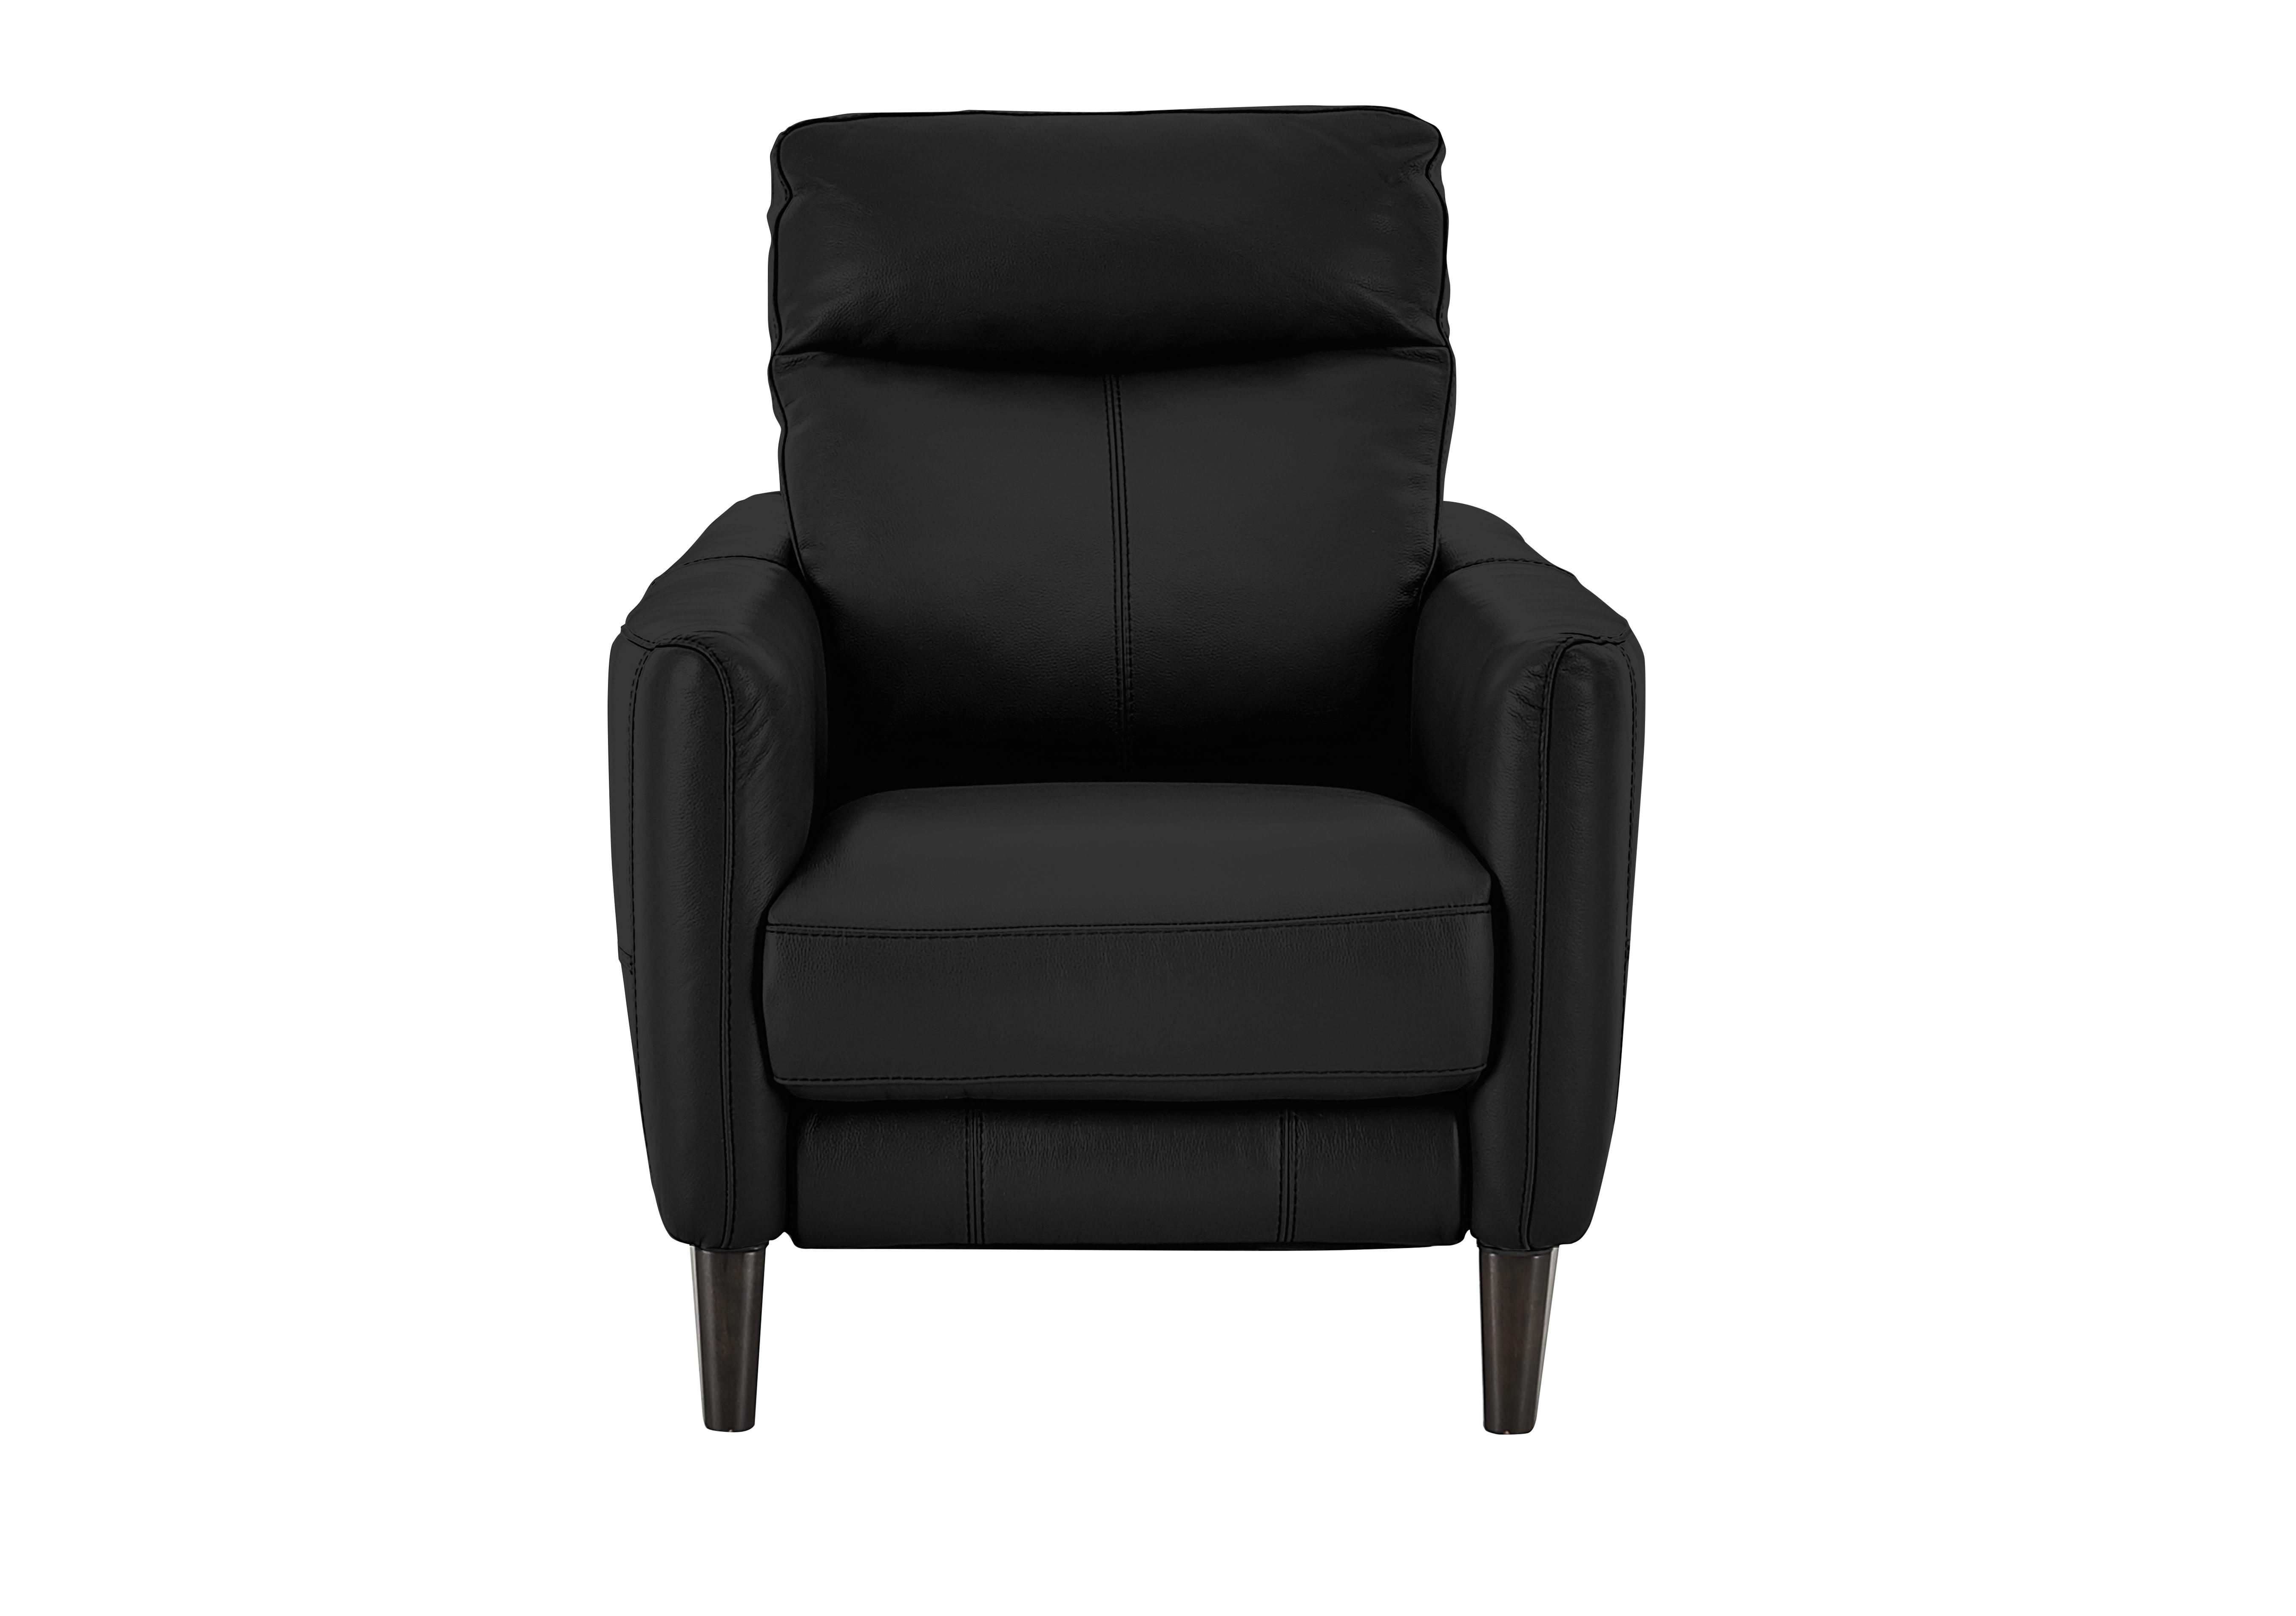 Compact Collection Petit Leather Recliner Armchair in Bv-3500 Classic Black on Furniture Village